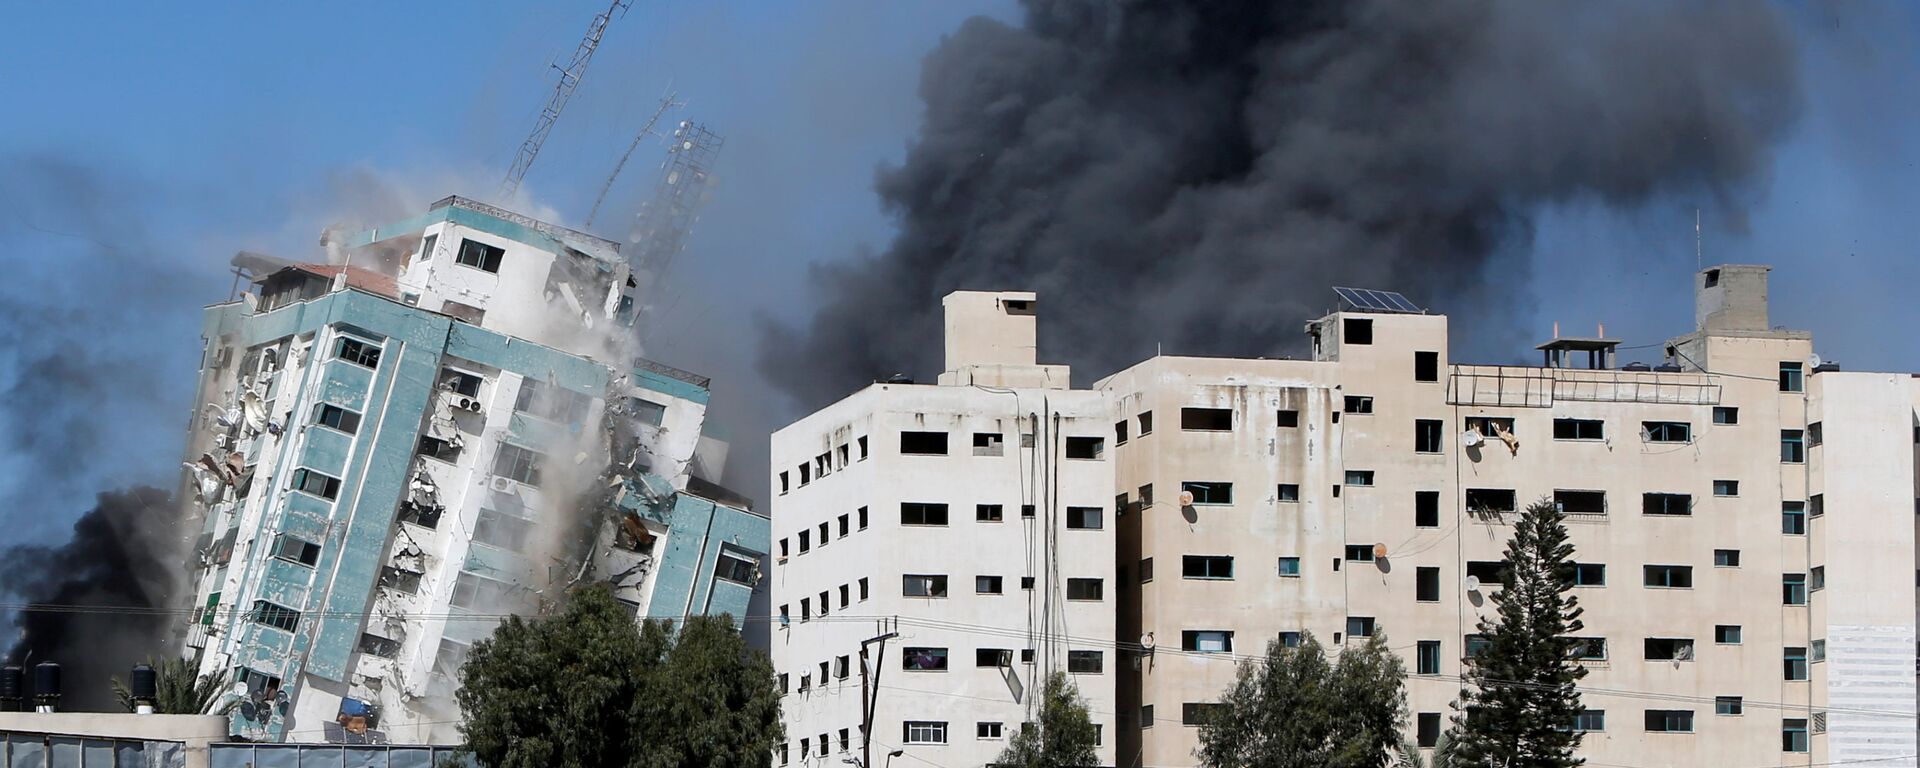 A tower housing AP, Al Jazeera offices collapses after Israeli missile strikes in Gaza city, 15 May 2021.  - Sputnik International, 1920, 24.05.2021